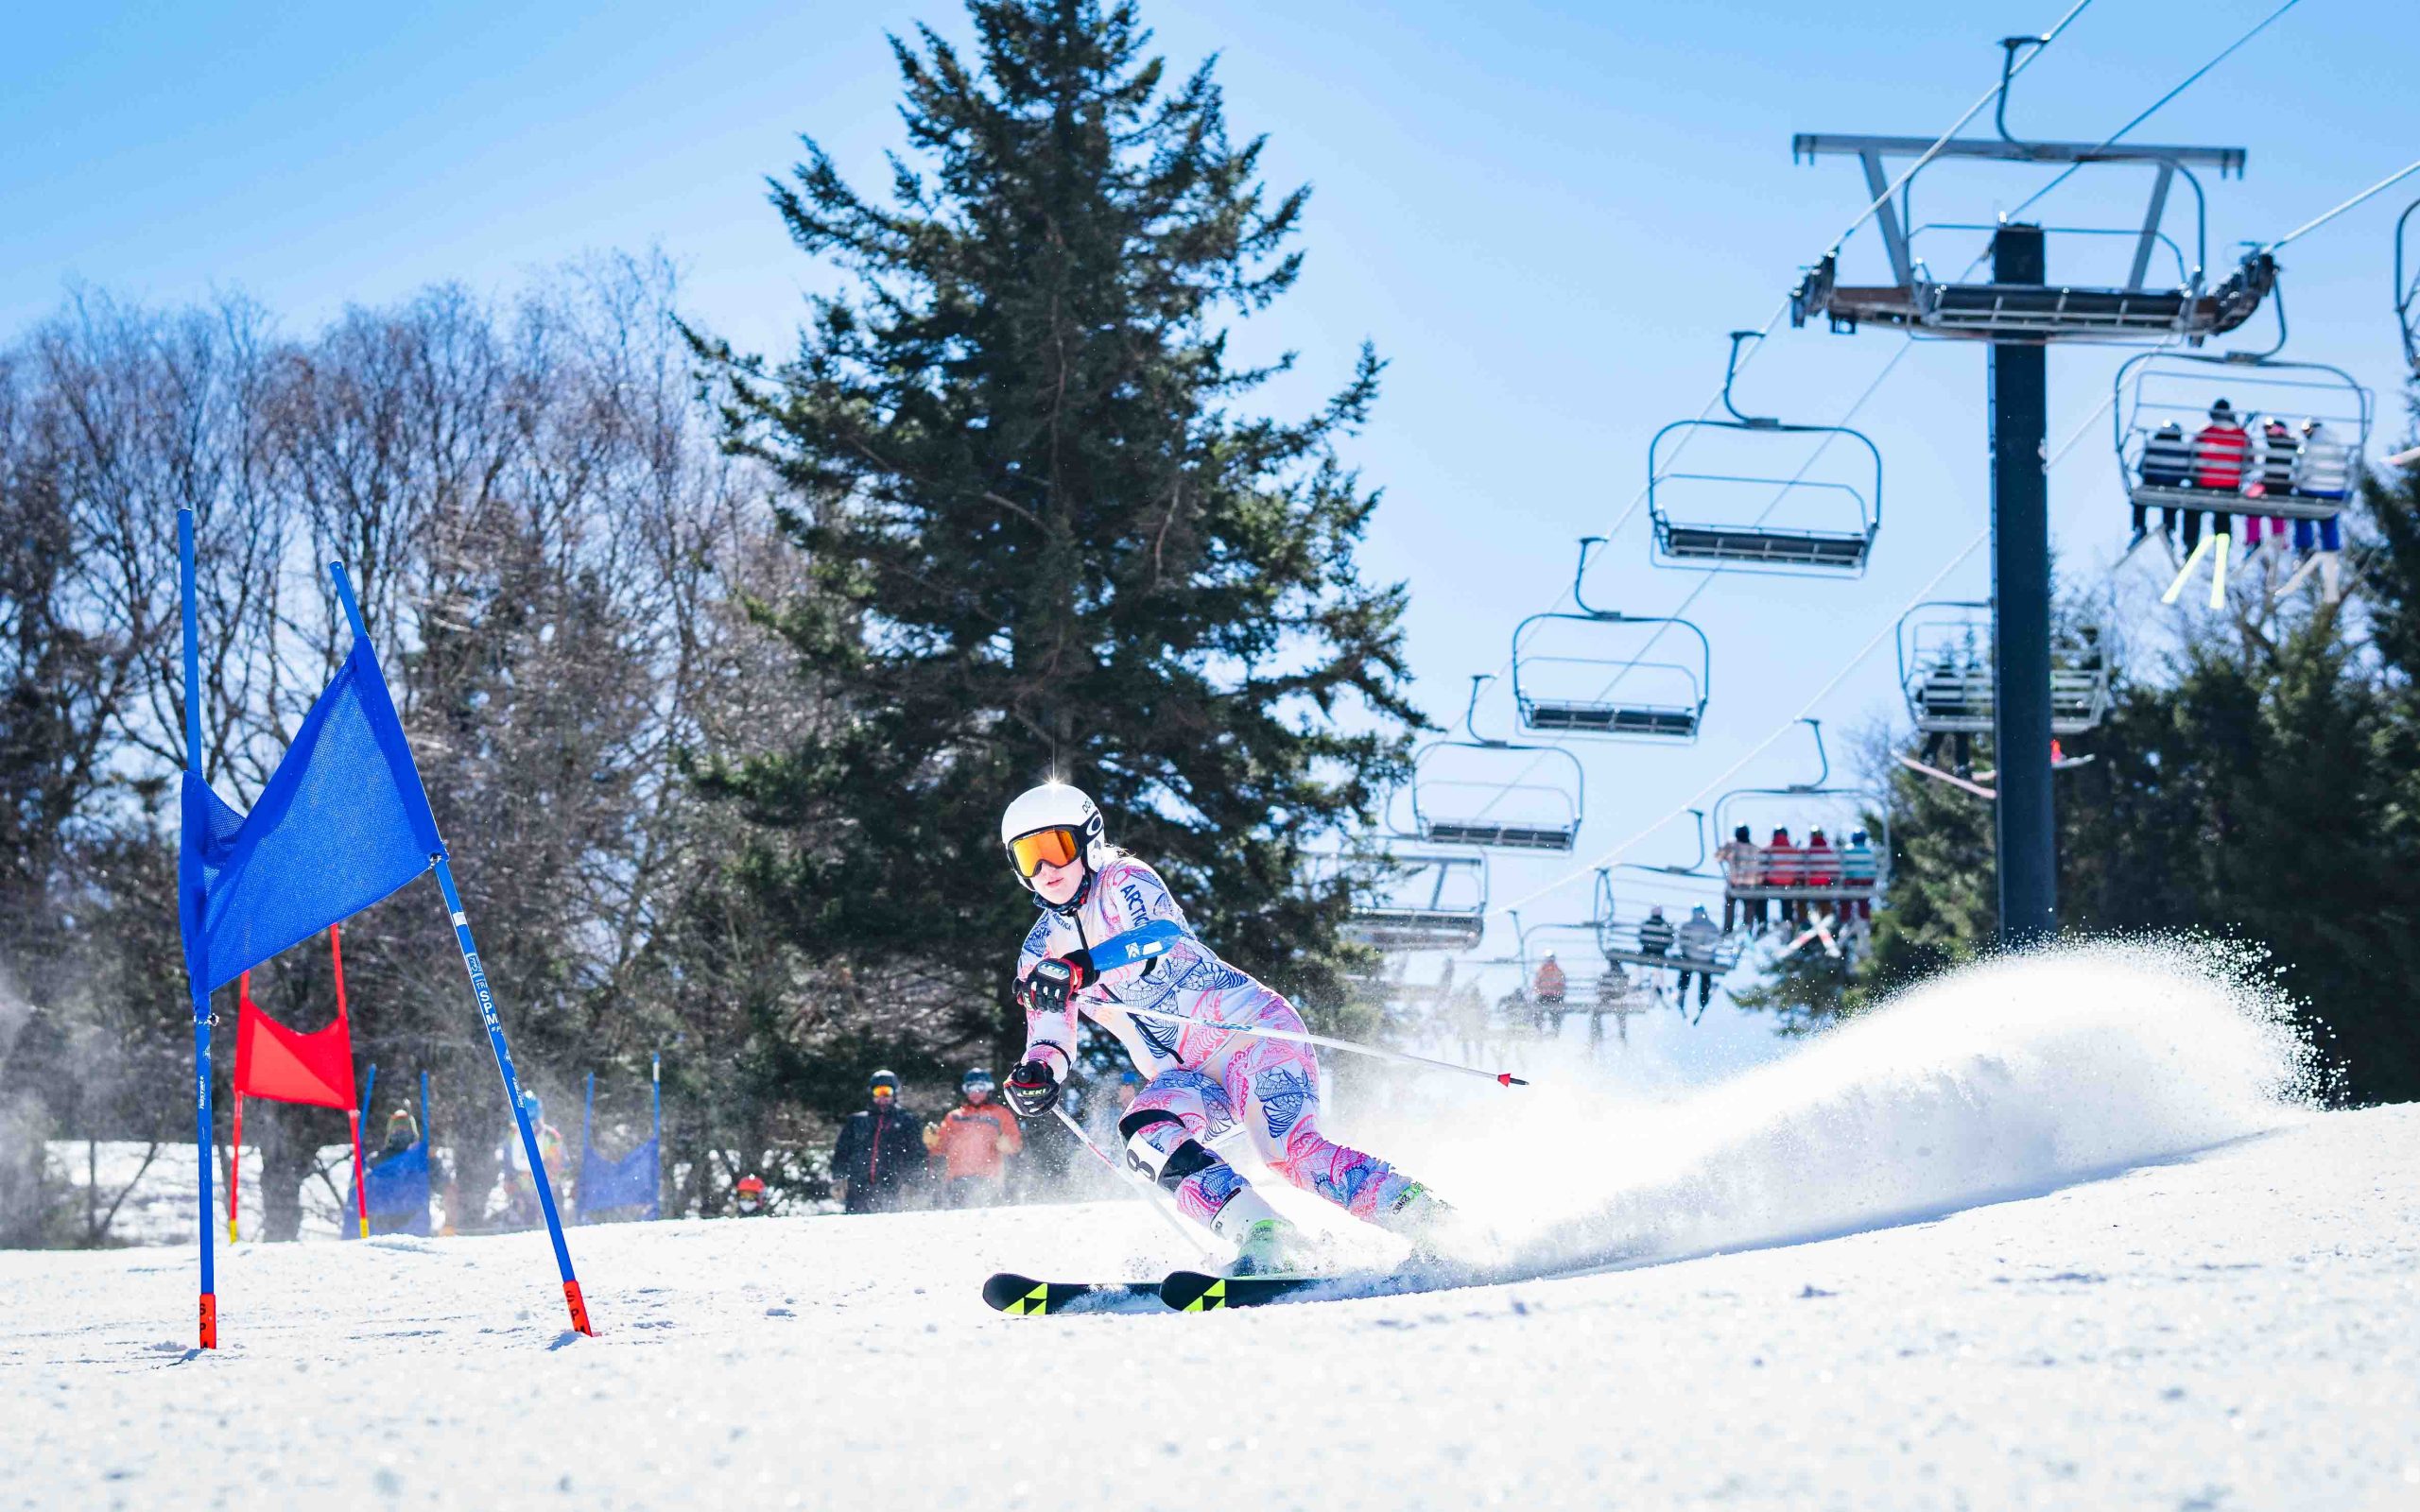 Governor’s Cup Ski Race at Timberline Mountain